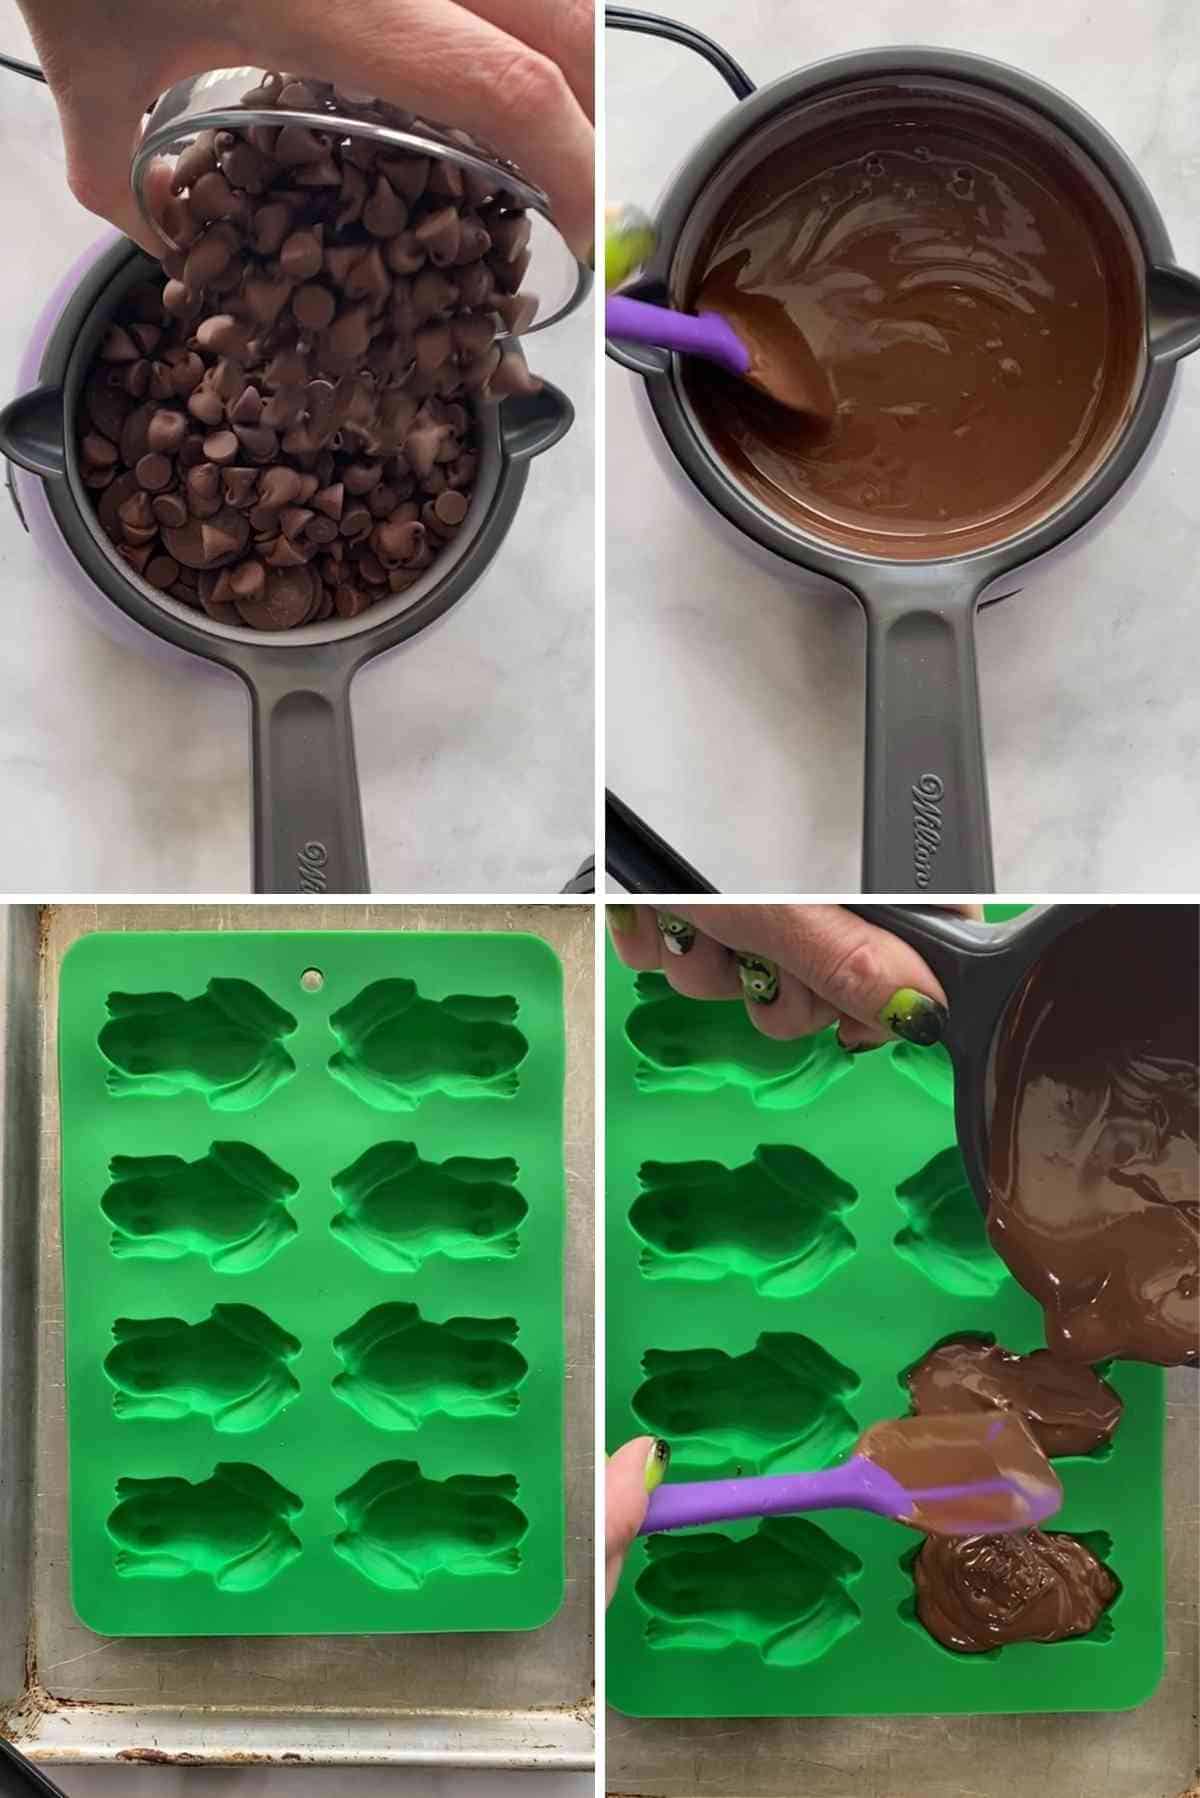 Melt the chocolate and pour into the molds!